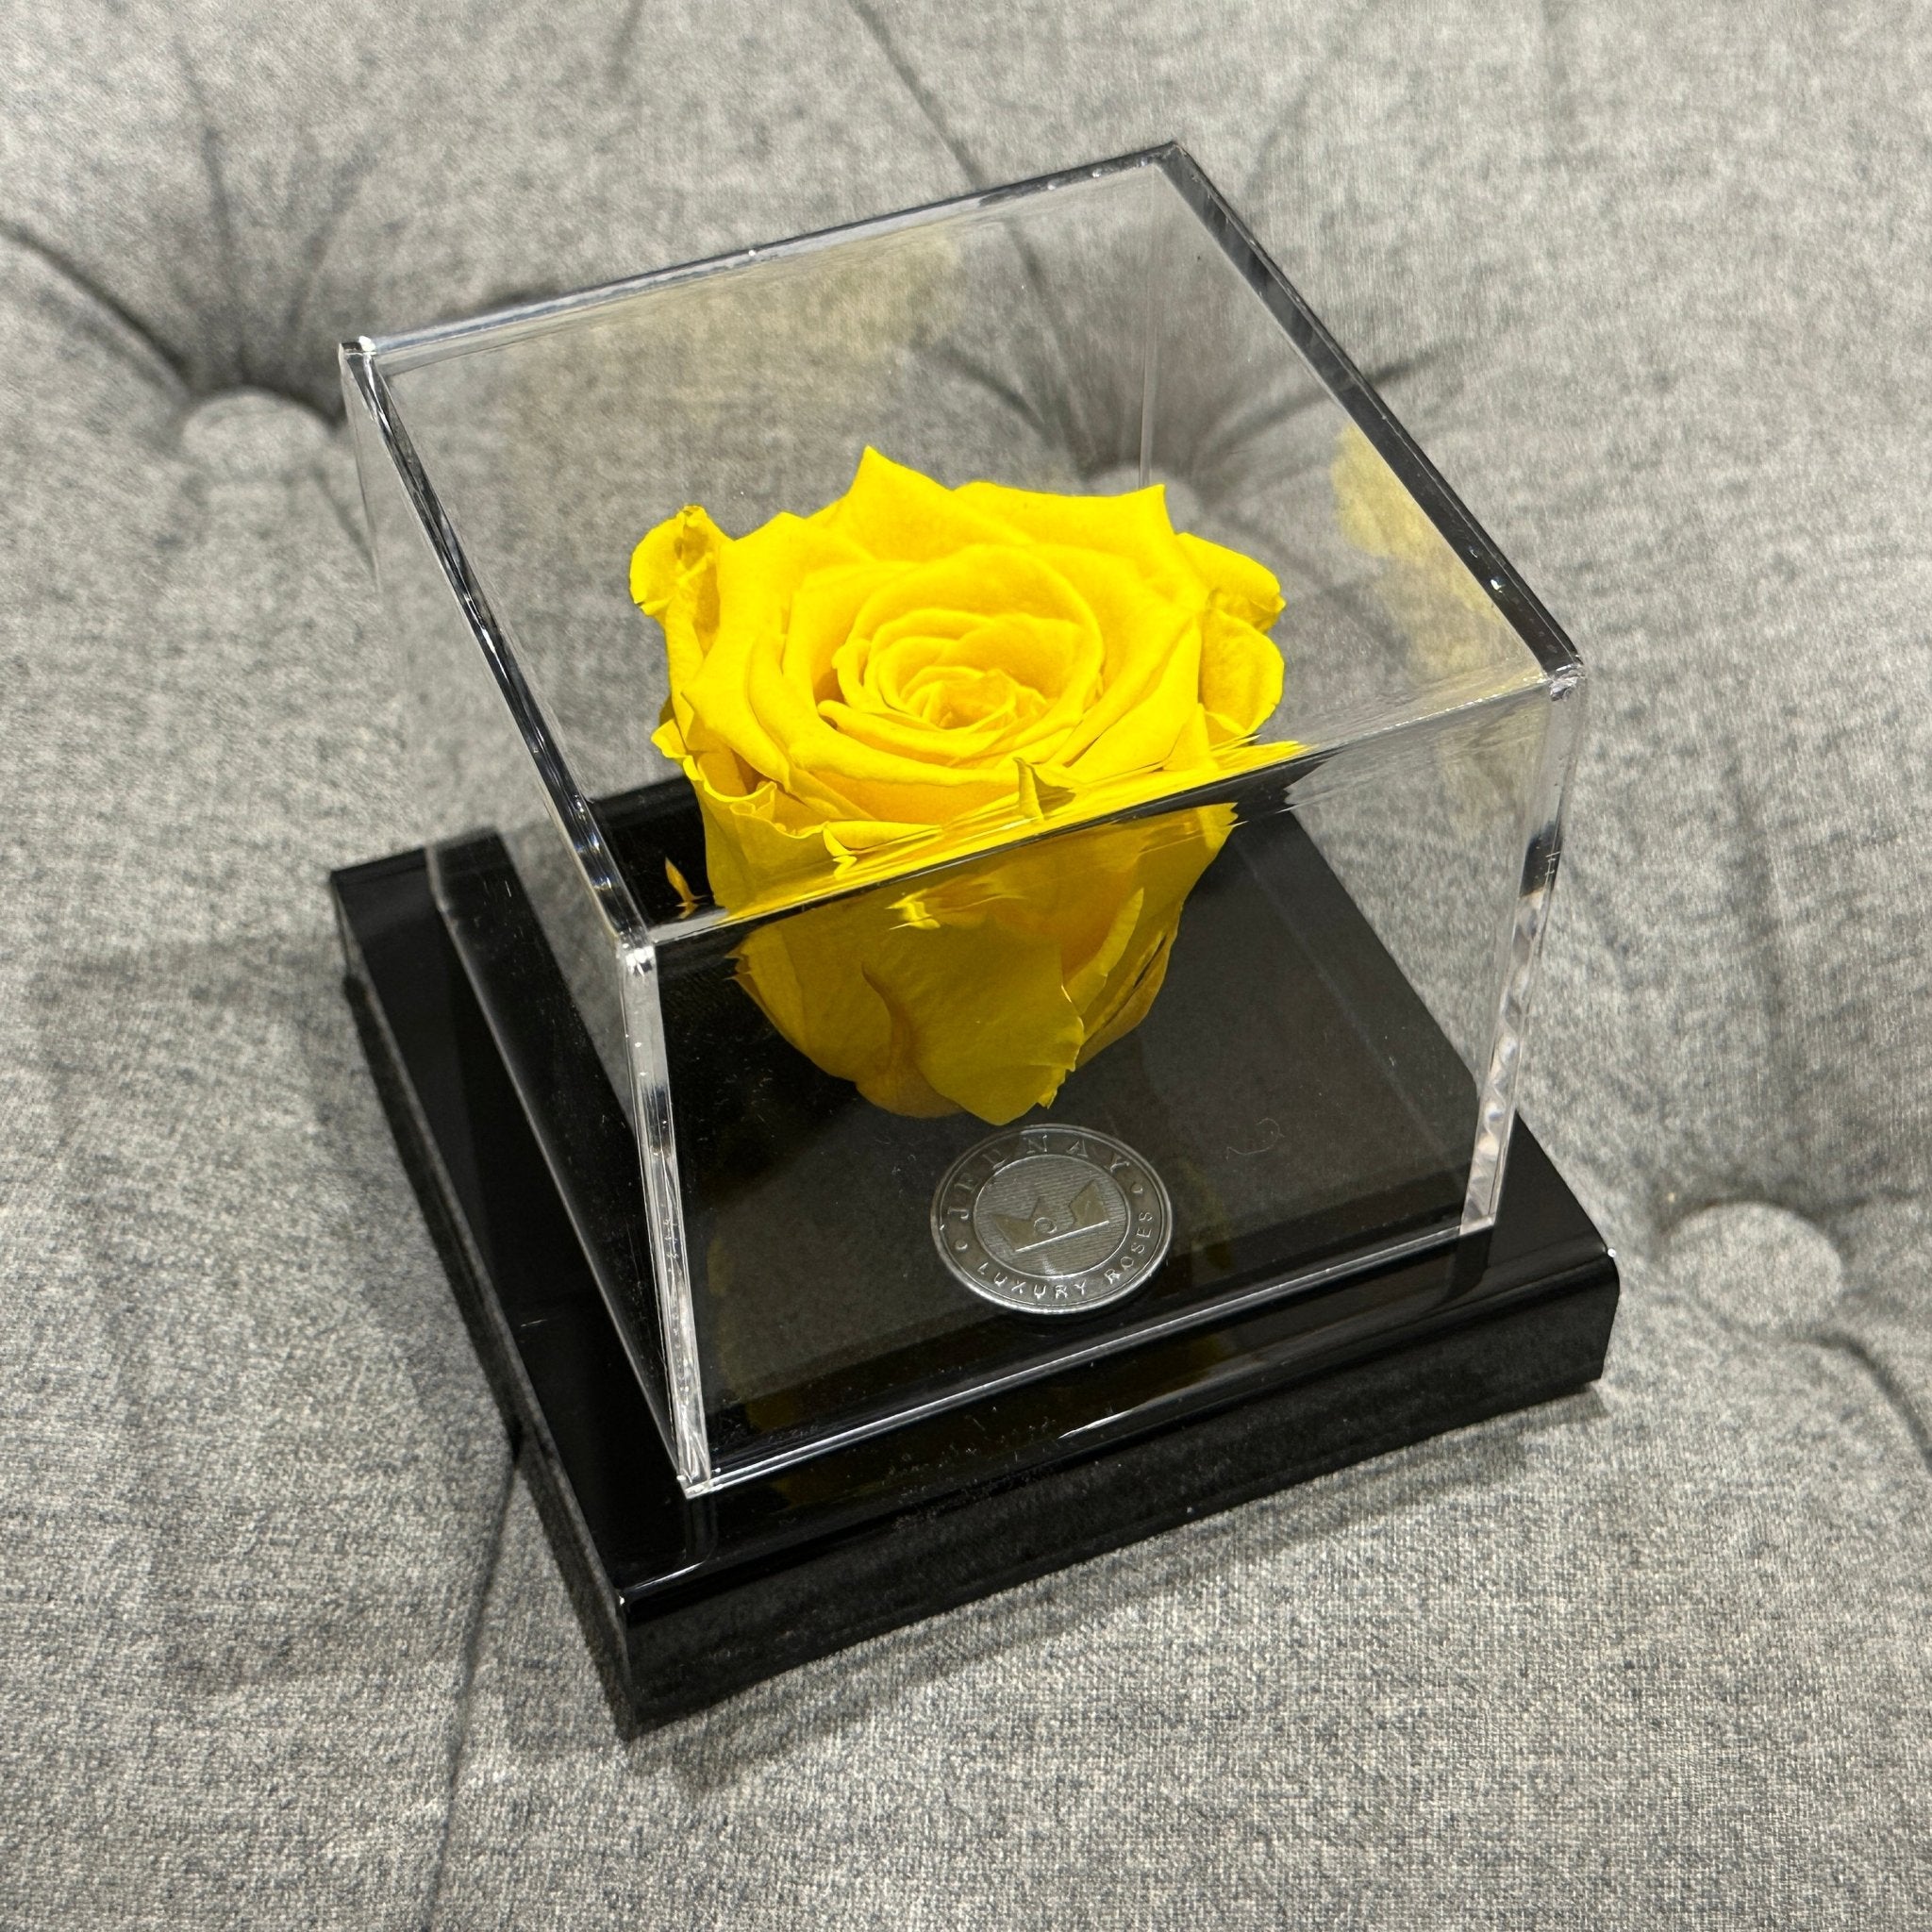 The Clarity Deluxe Sunshine Yellow Eternal Rose - Jednay Roses